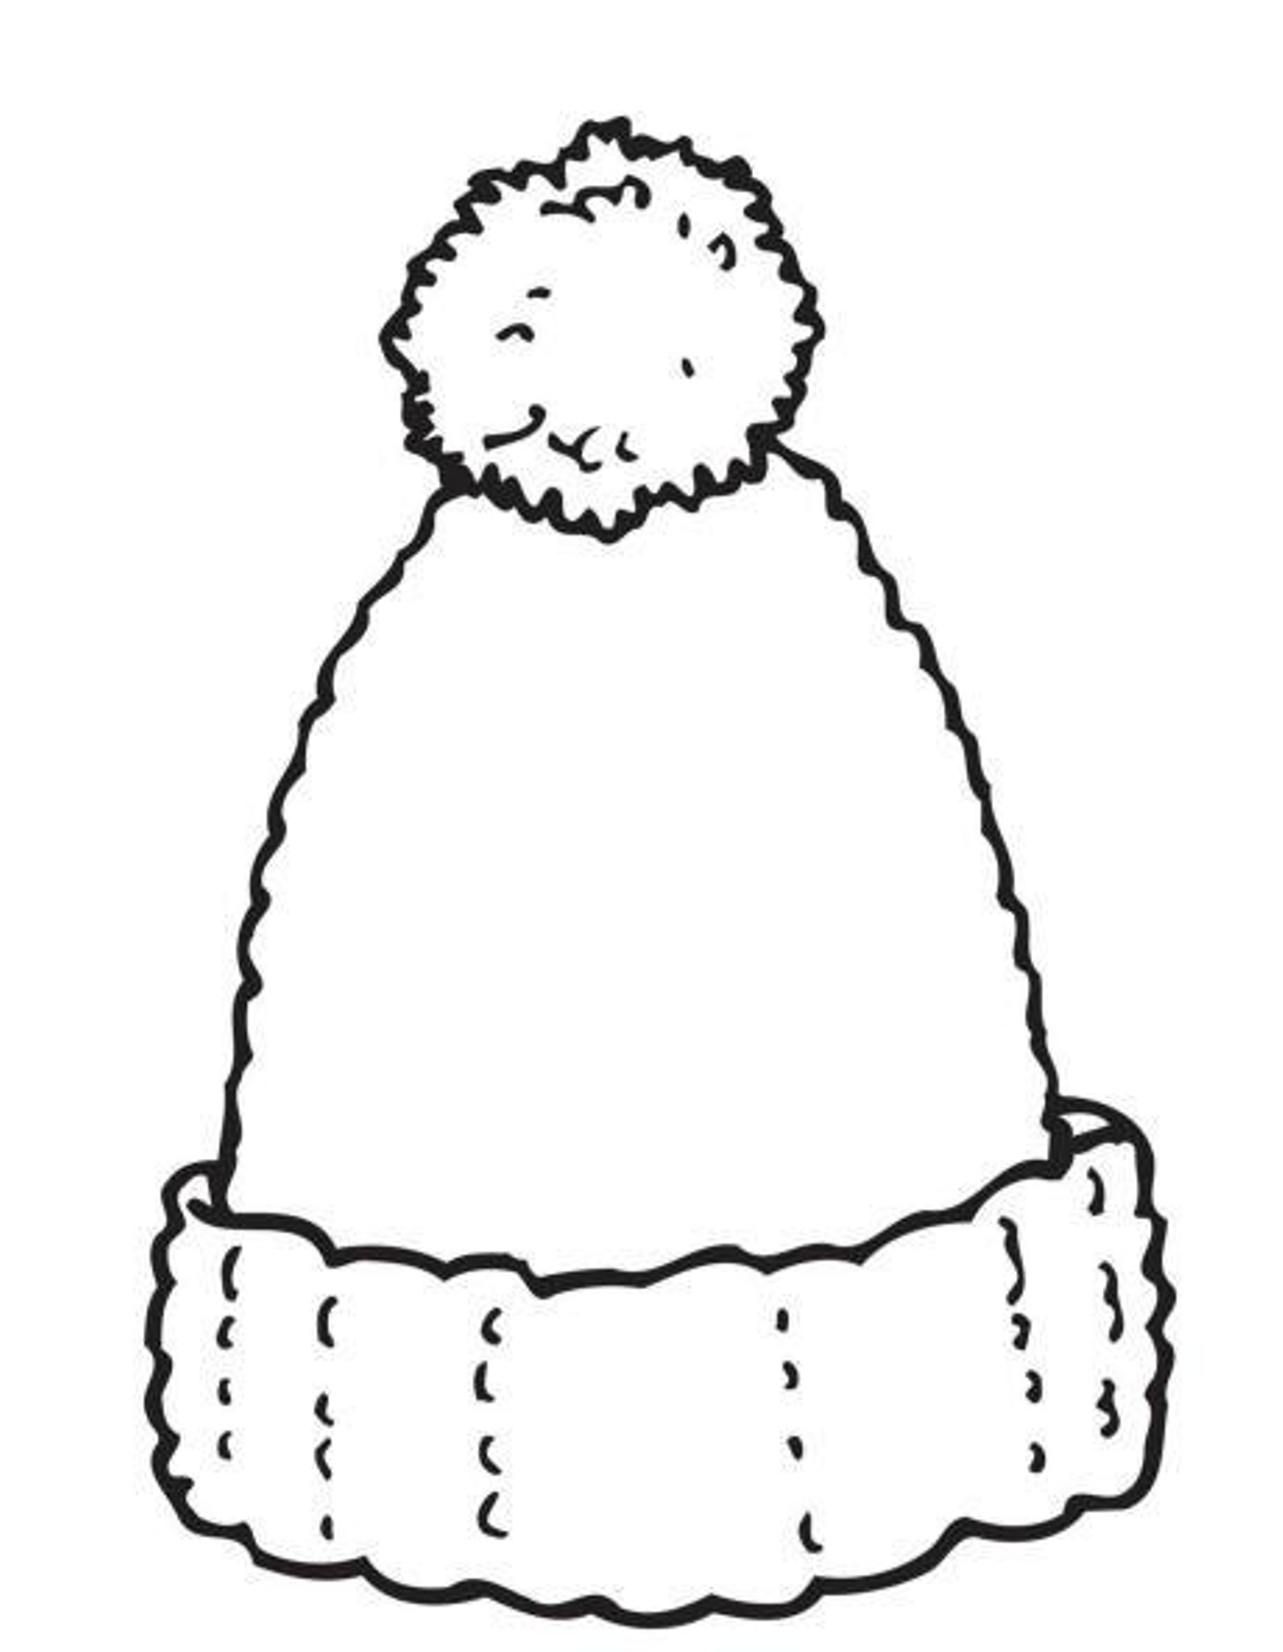 Woolly Hat Winter Coloring Pages | Winter Coloring pages of ...